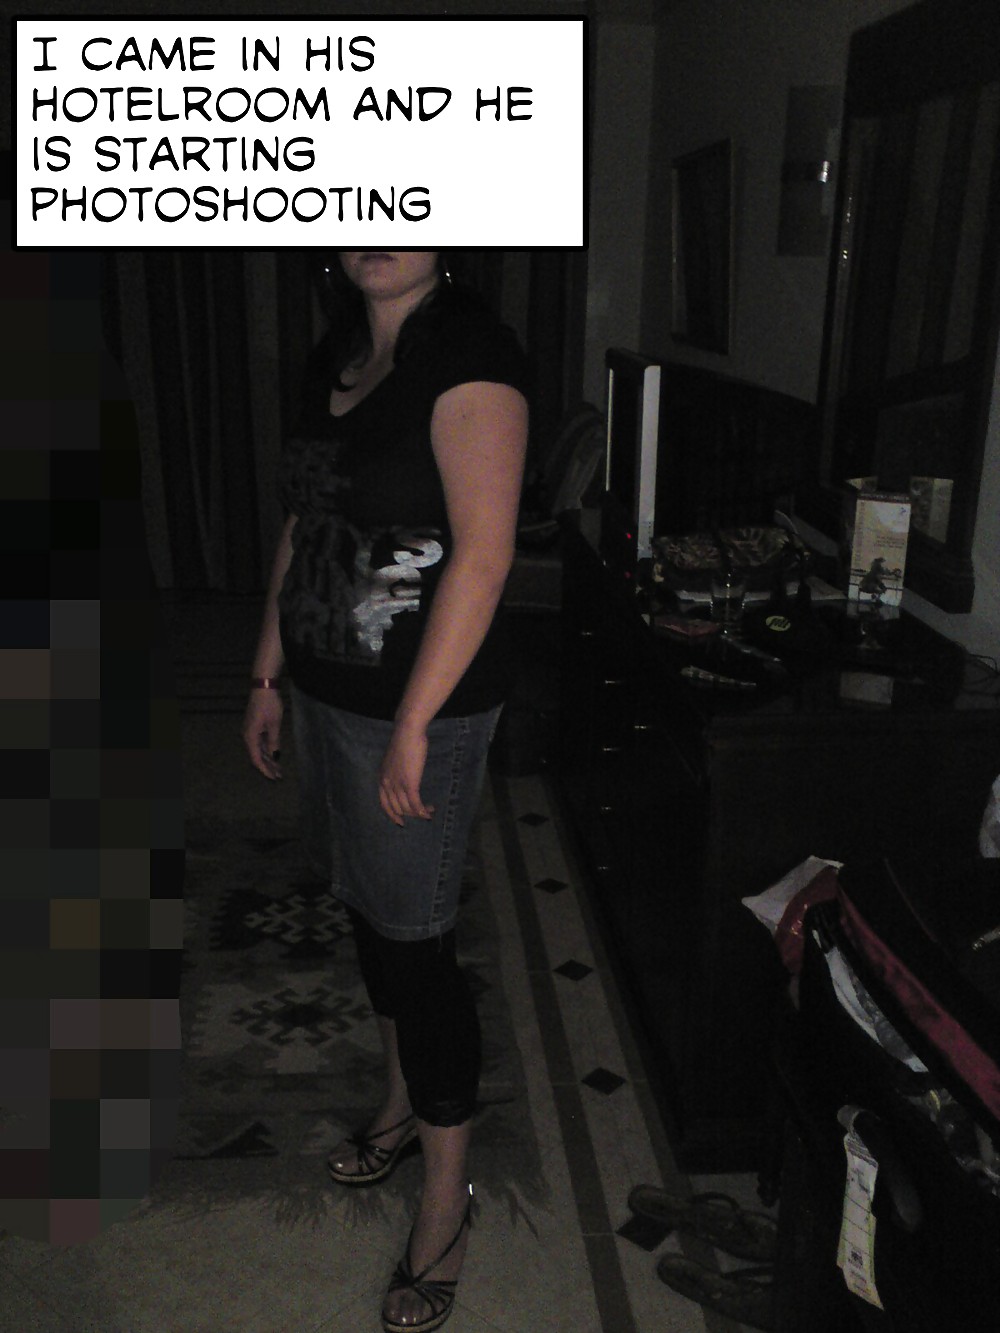 My photostrip story-hubby doesn't know #20128946